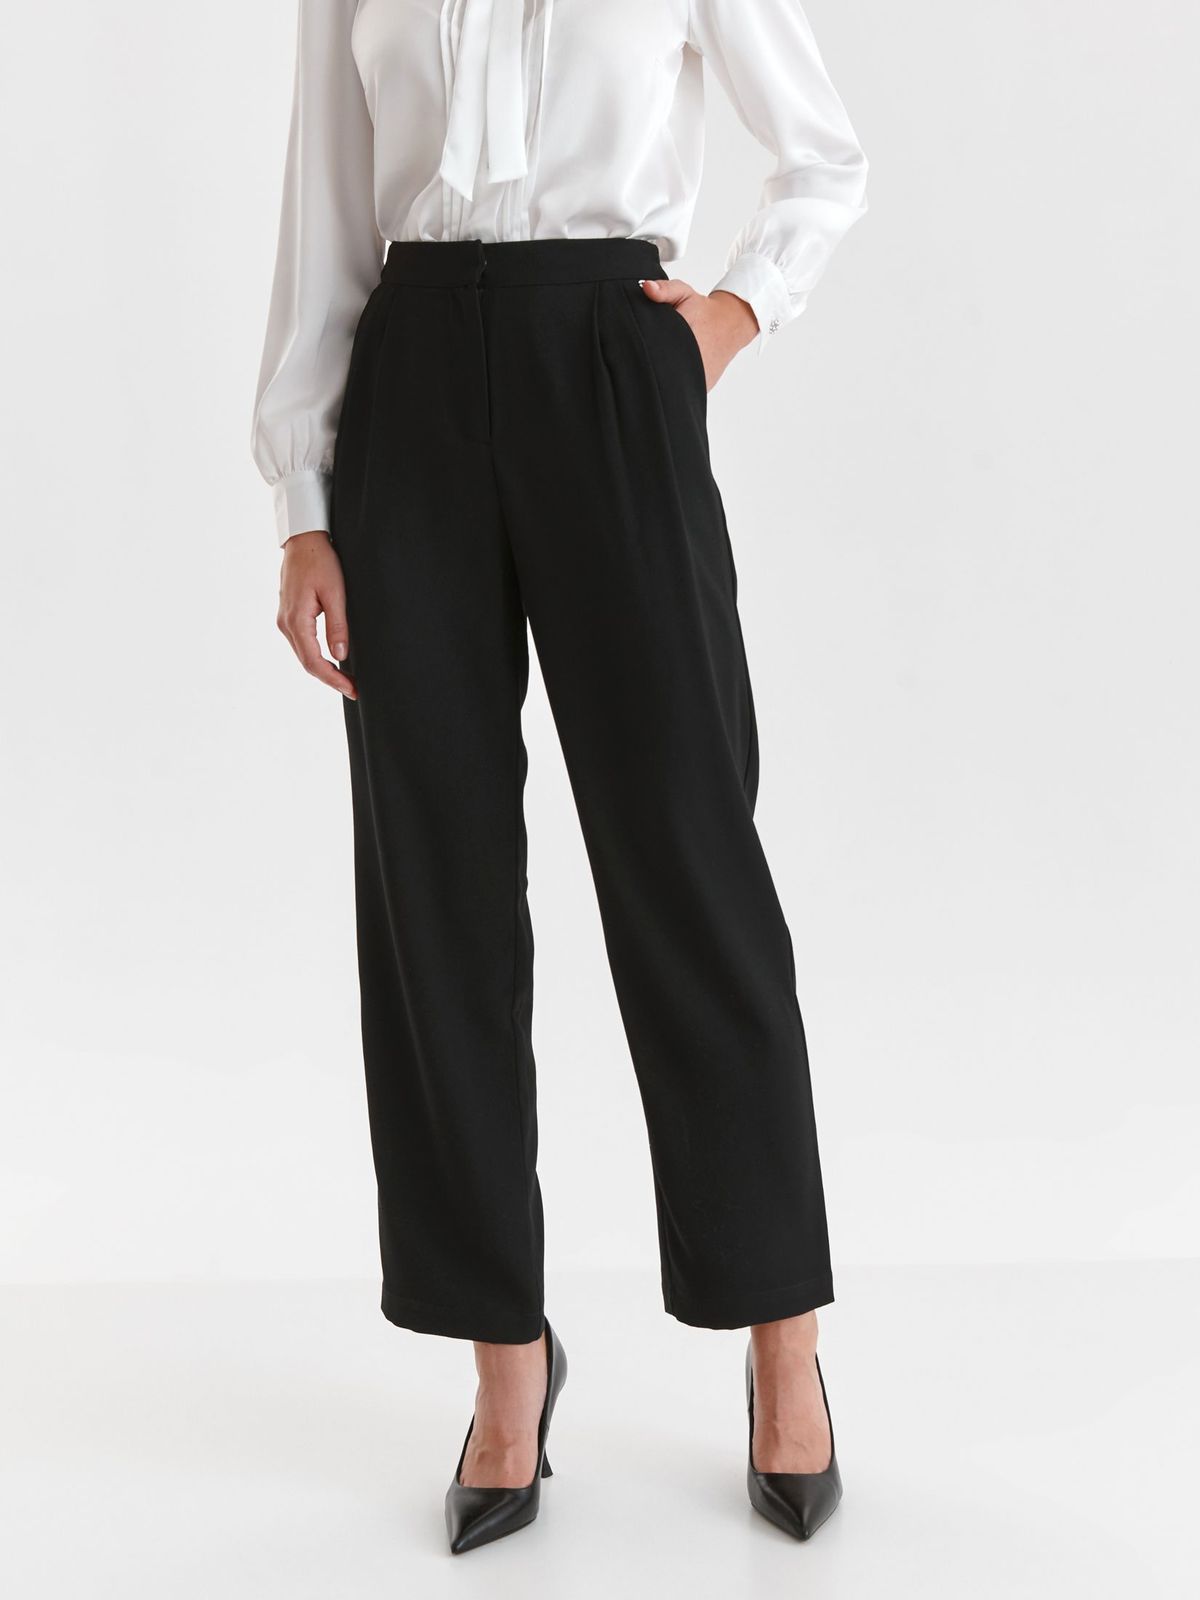 Black trousers flared with pockets high waisted slightly elastic fabric